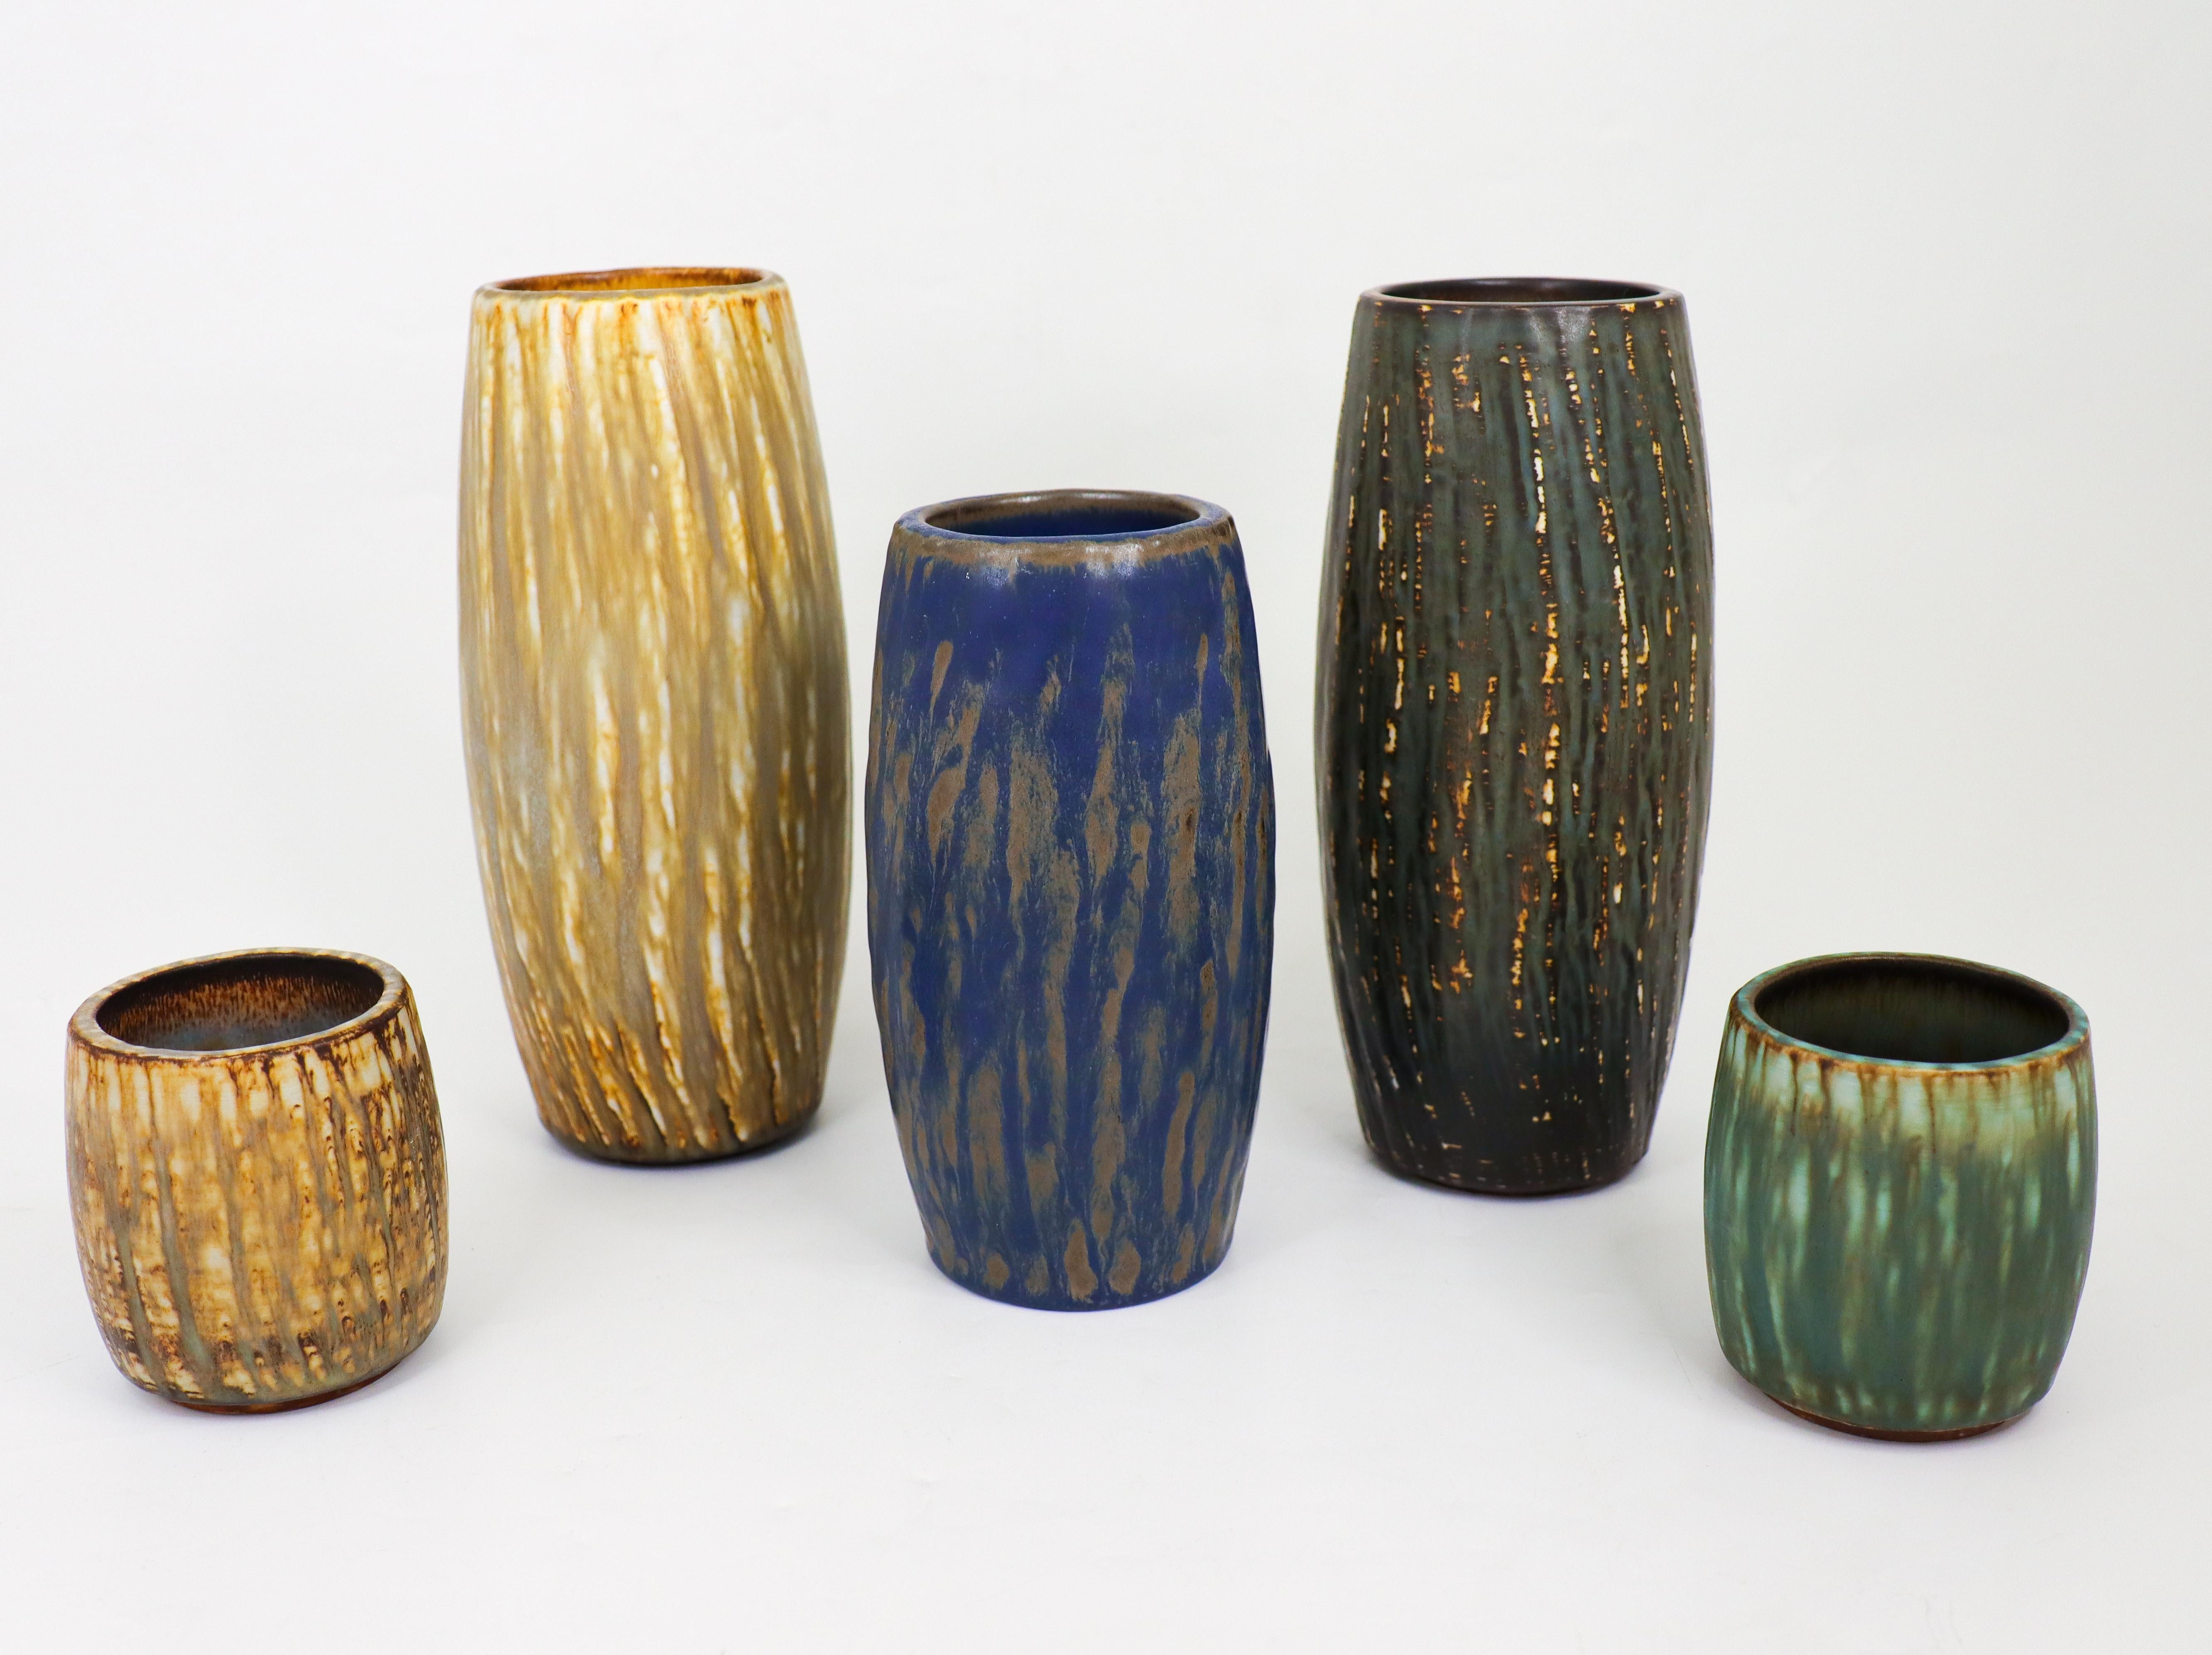 A group of five vases of model Rubus designed by Gunnar Nylund at Rörstrand in the 1950s. The vases are between  8.5 - 22 cm high and in excellent condition. Three of the vases are 1st quality and two are 2nd quality. 

Carl-Harry Stålhane is one of